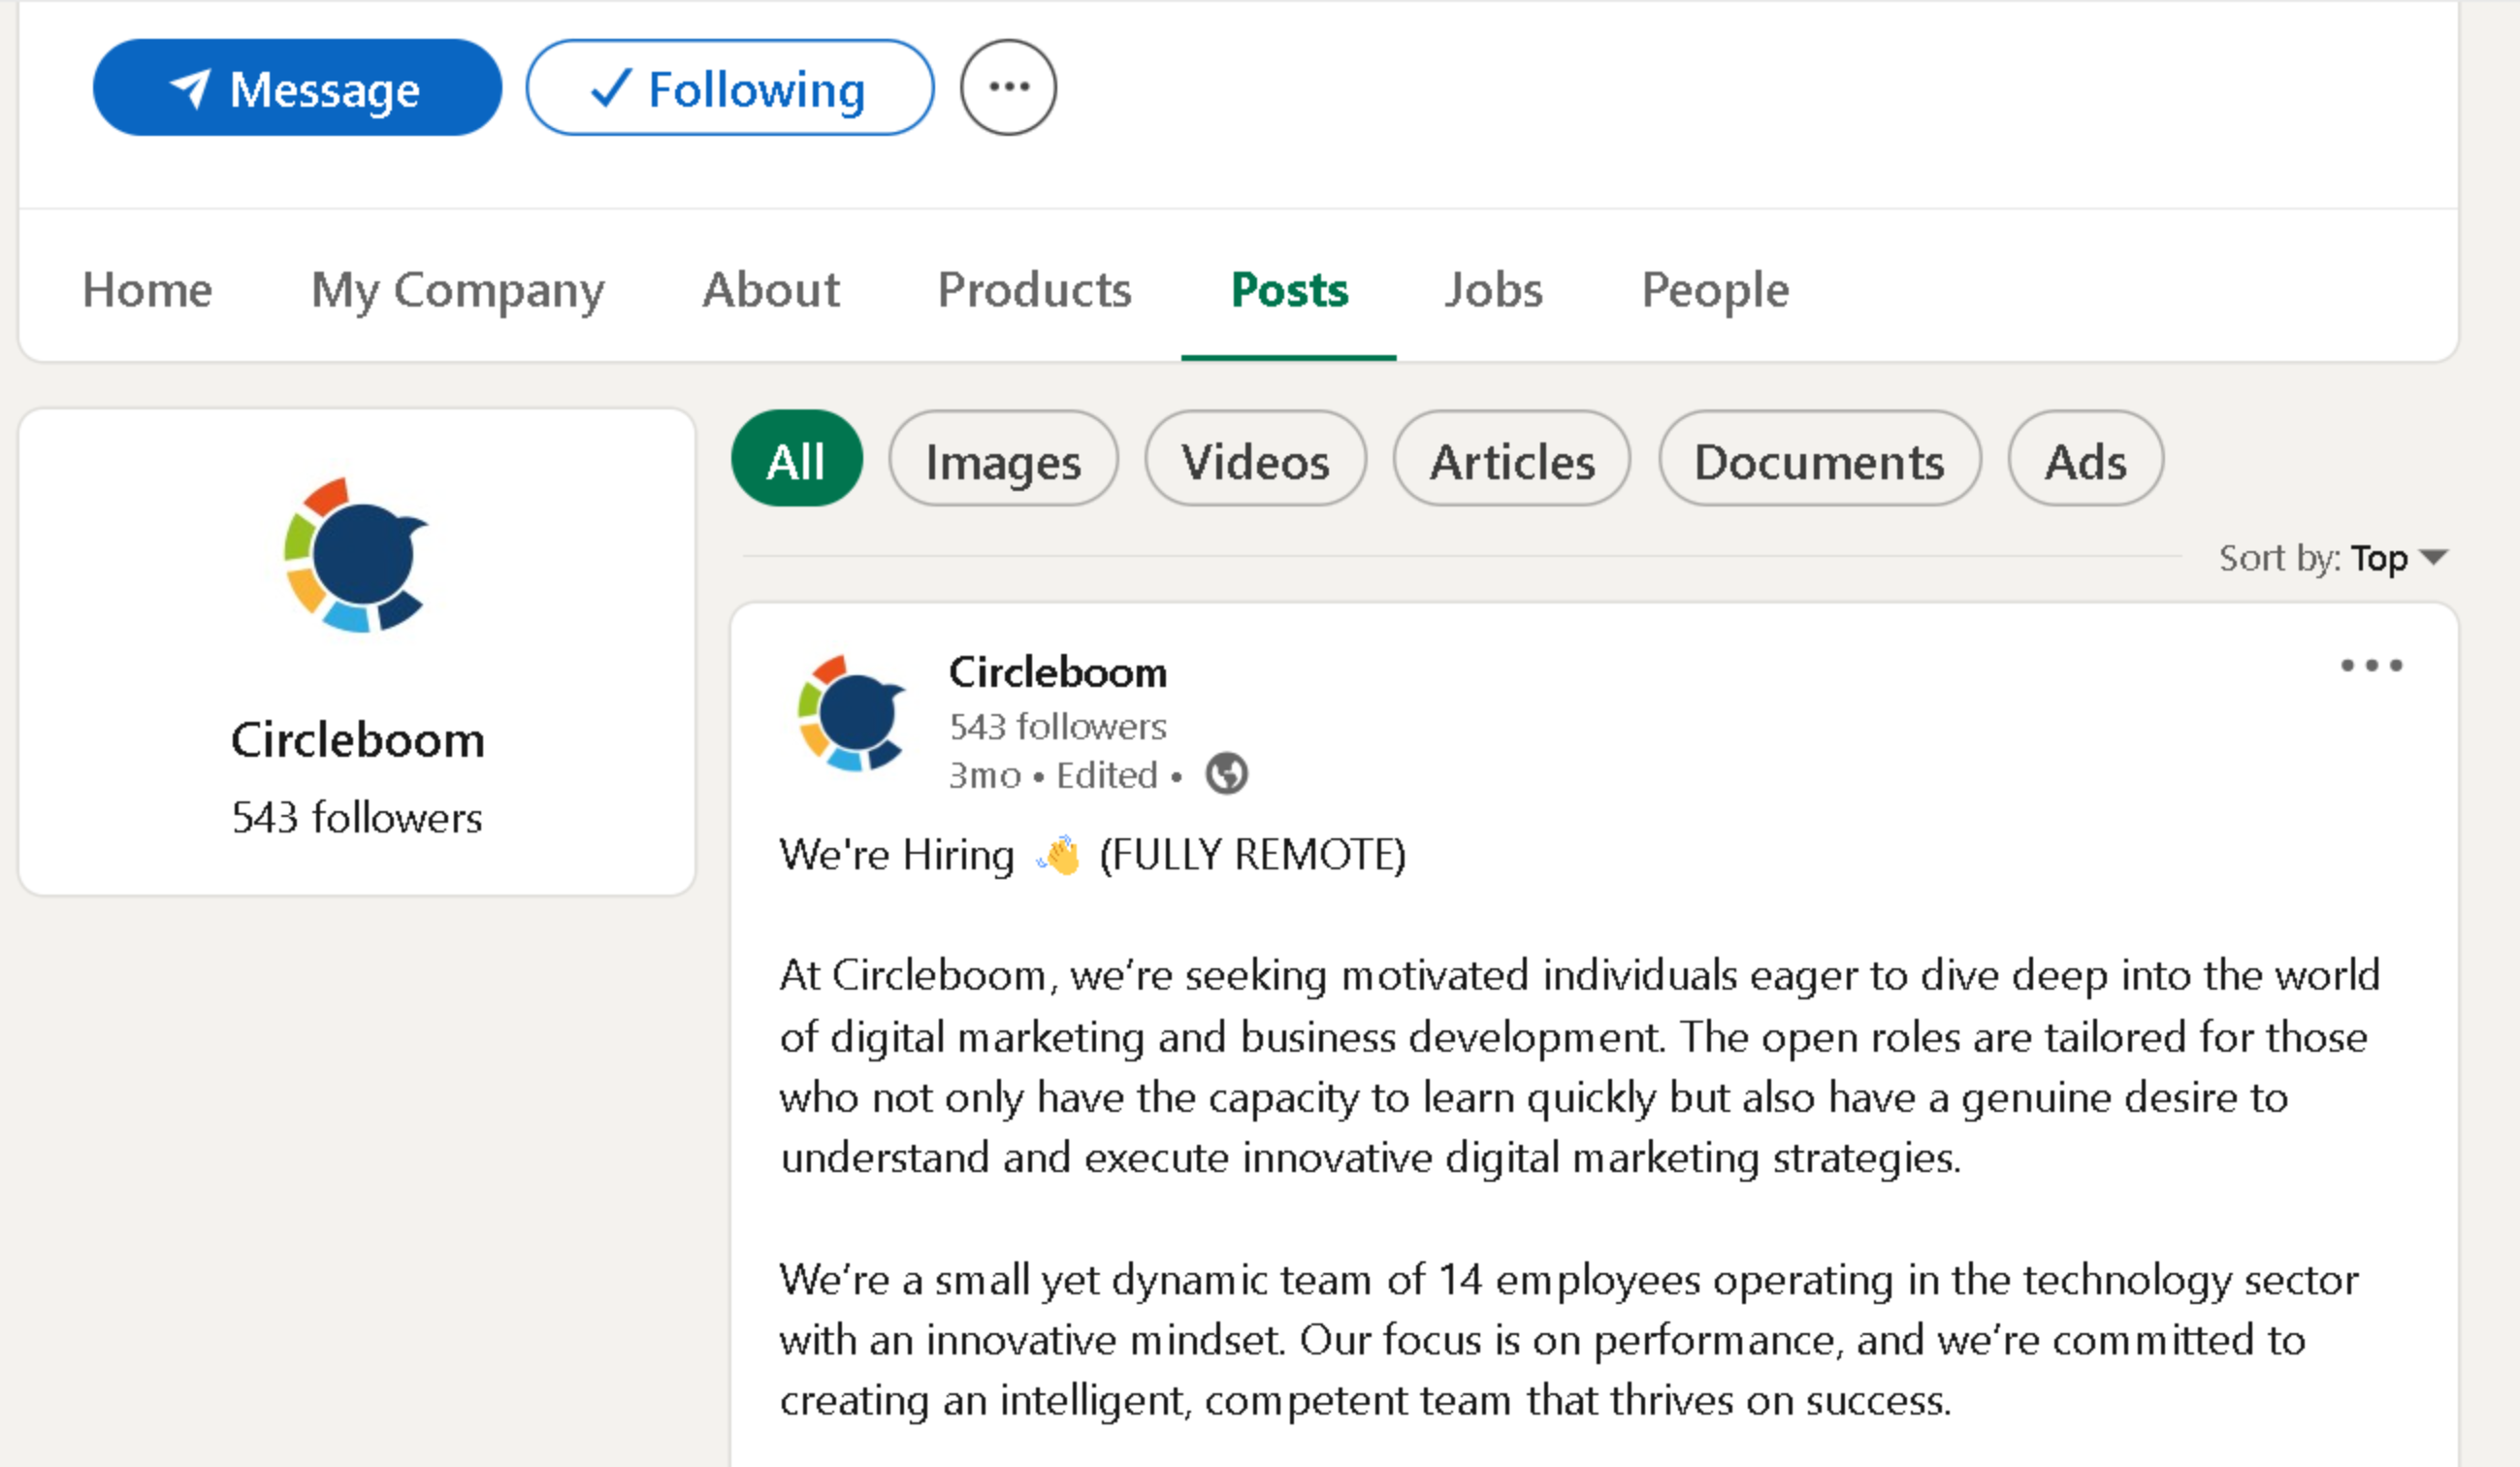 You can create a LinkedIn job post as plain text, like any other single post.